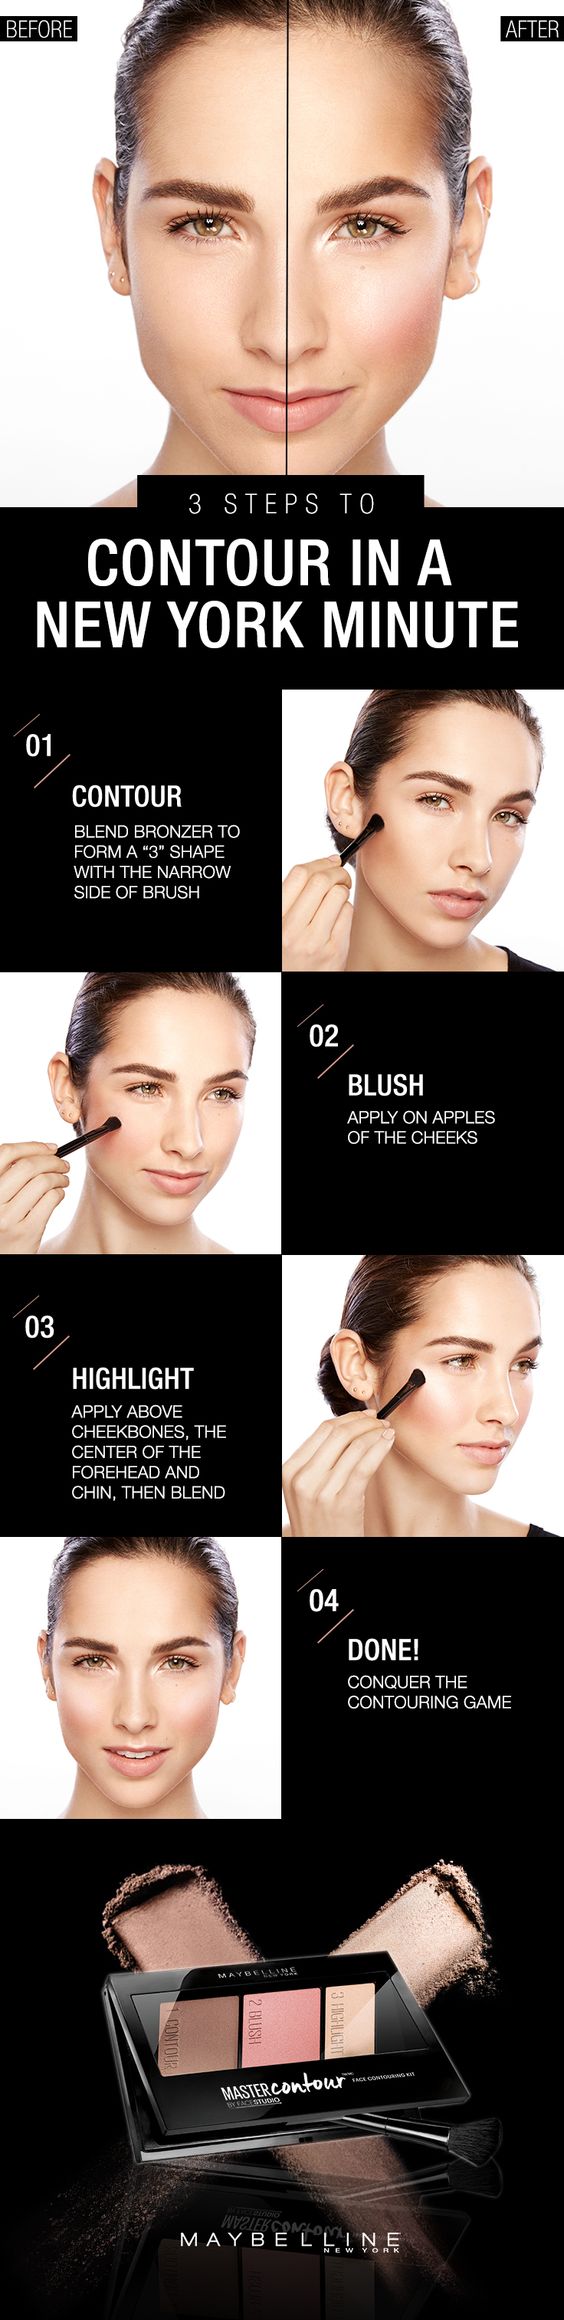 8 Pretty Simple Makeup Hacks That Will Make You Look Gorgeous Easily